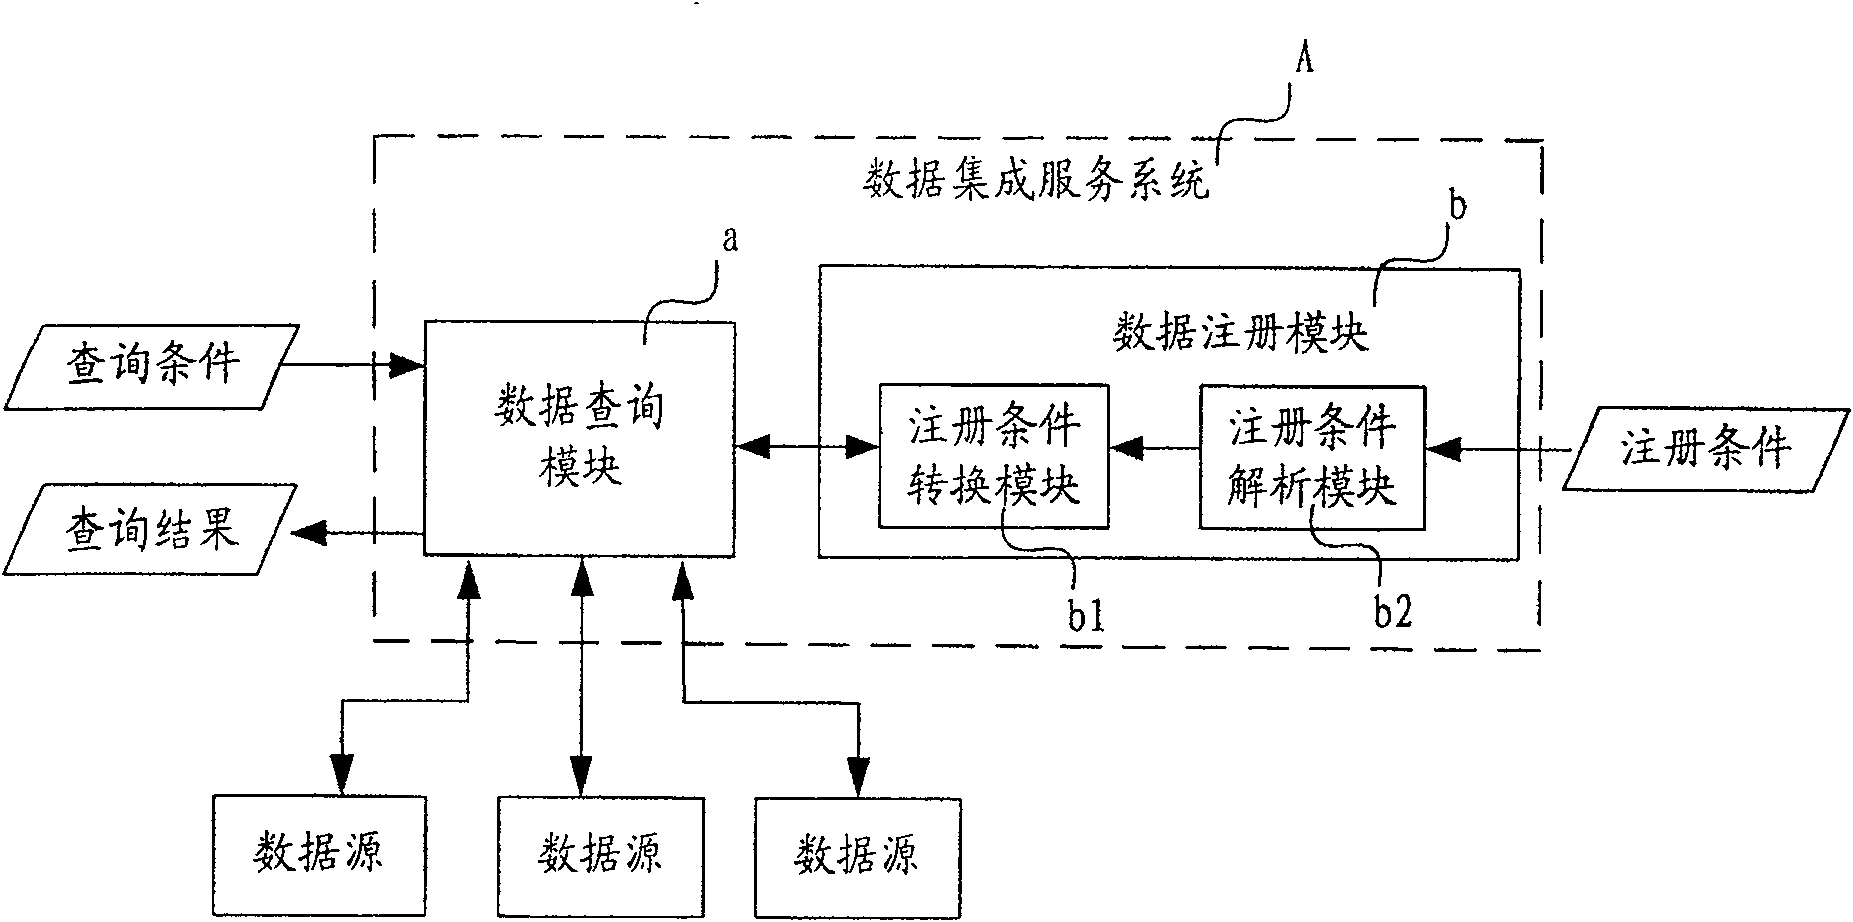 Data integral service system and method